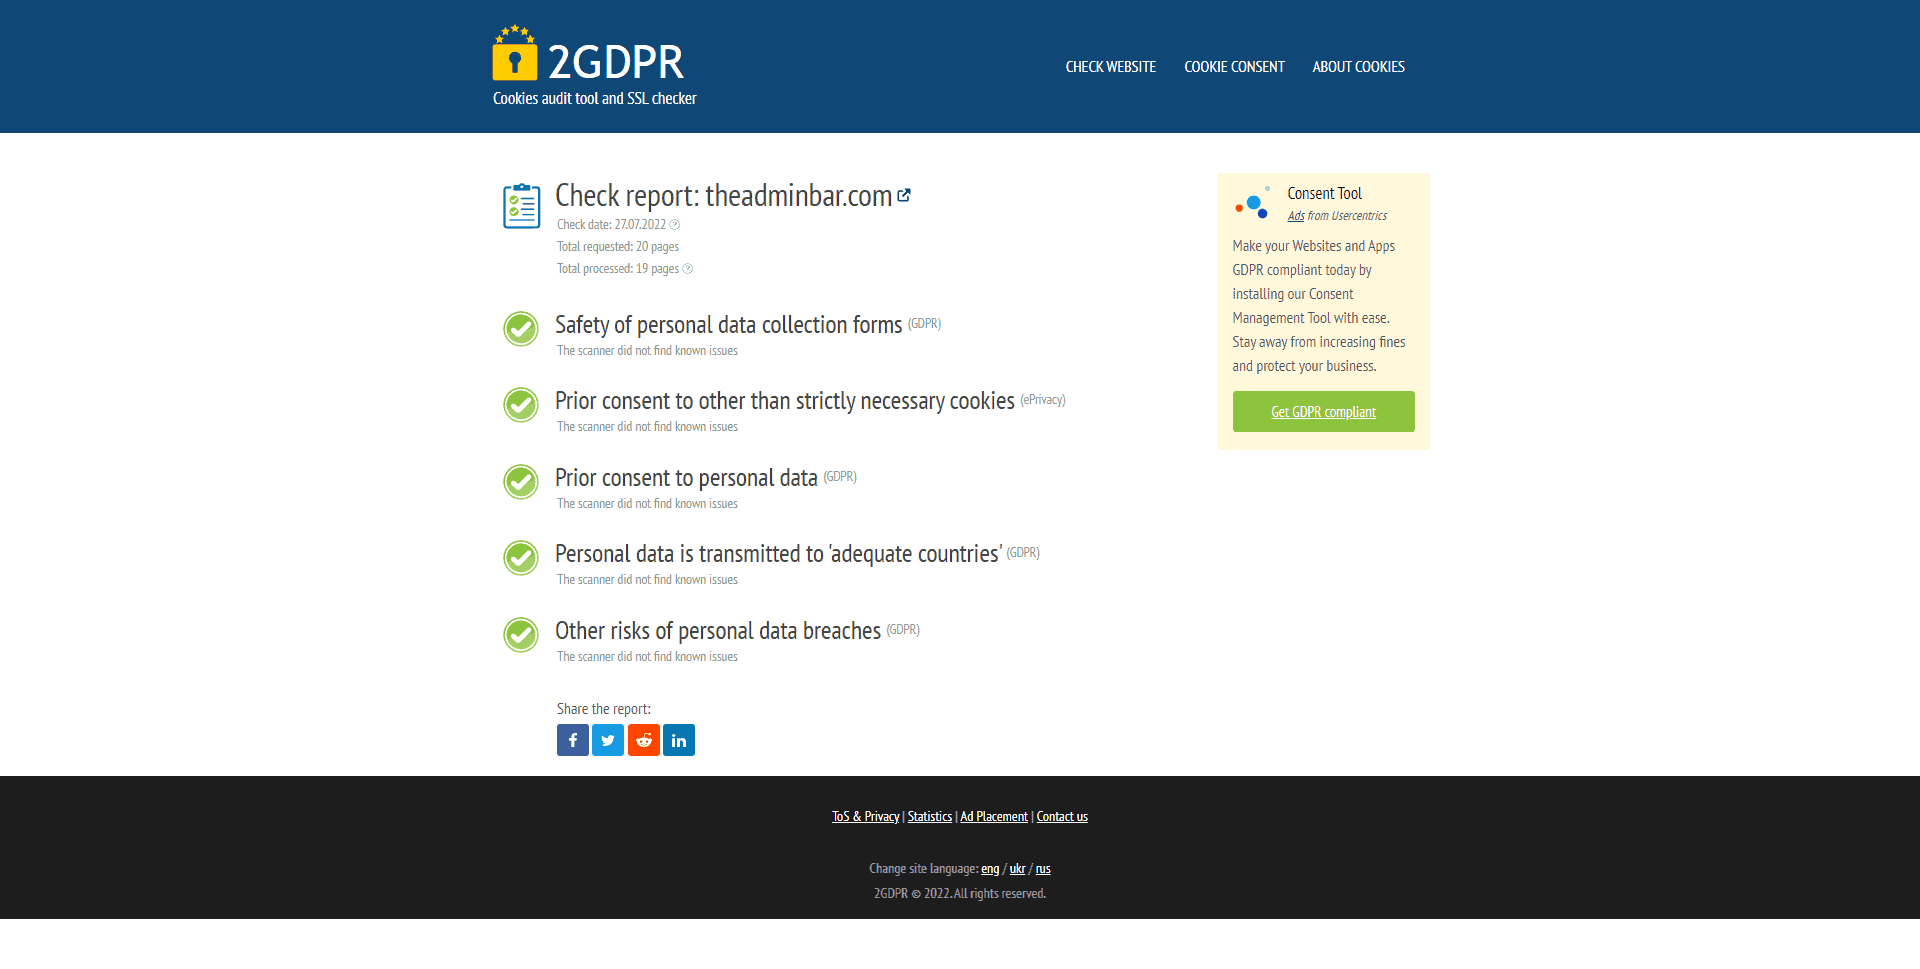 A screenshot of the results page using 2GDPR 